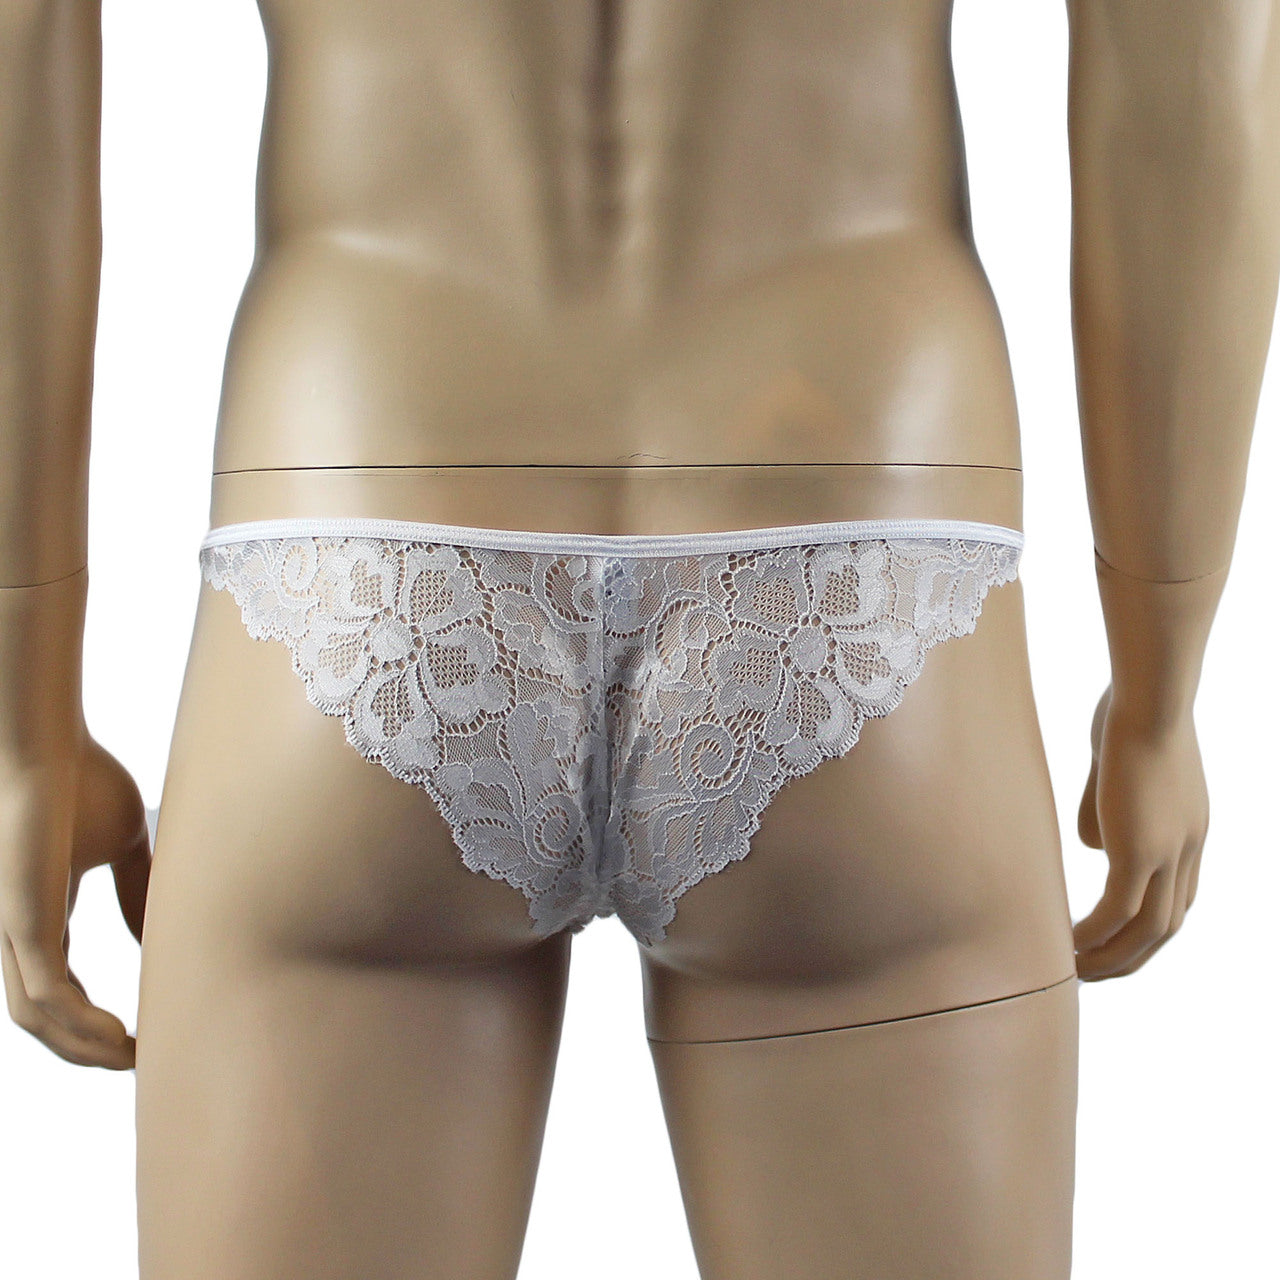 Mens Sweetheart Scalloped Shiny Lace Bra Top and Panty White